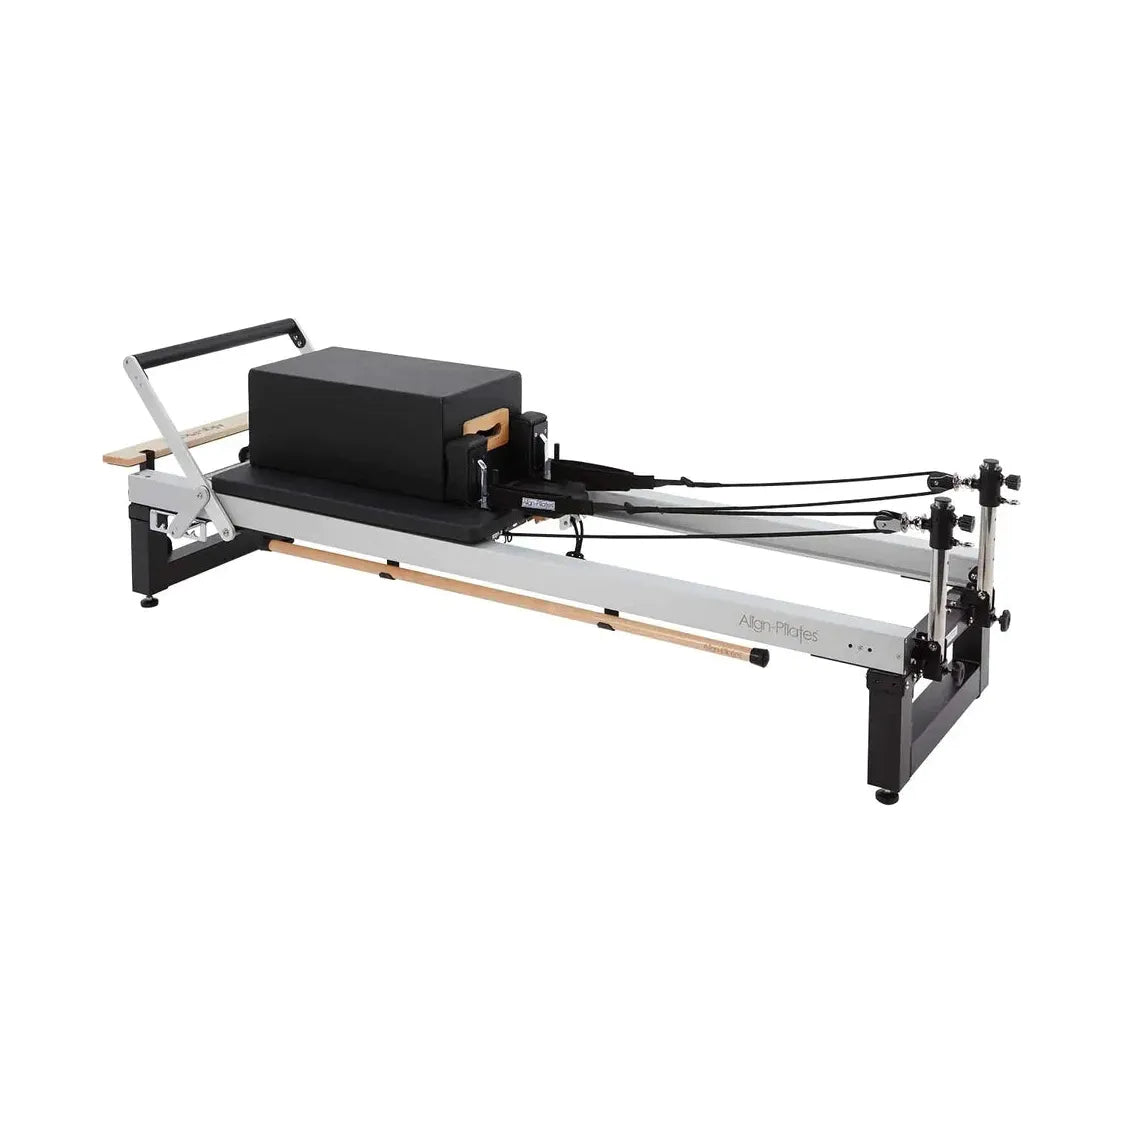 Image of Align Pilates A8 Pro Reformer, a professional-grade Pilates machine with sleek design with jumpbox